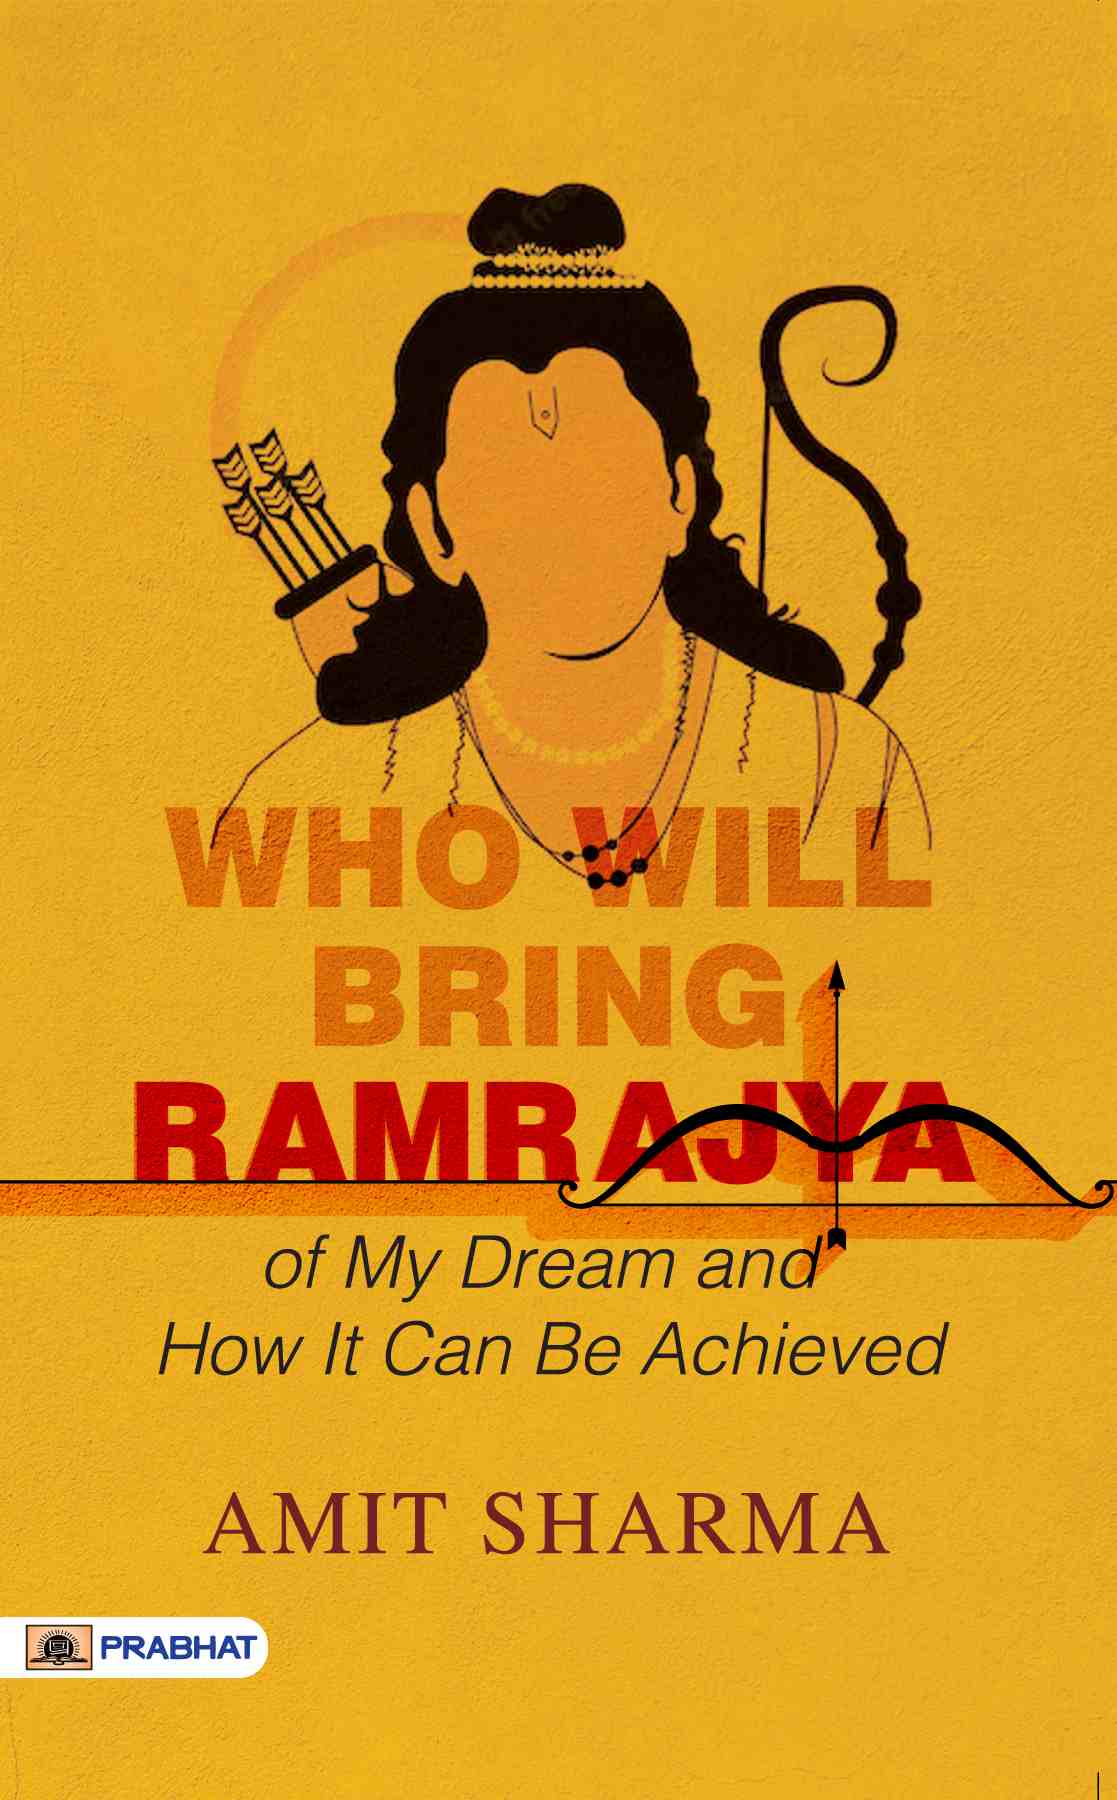 Who Will Bring Ramrajya : of My Dream and How It Can Be Achieved